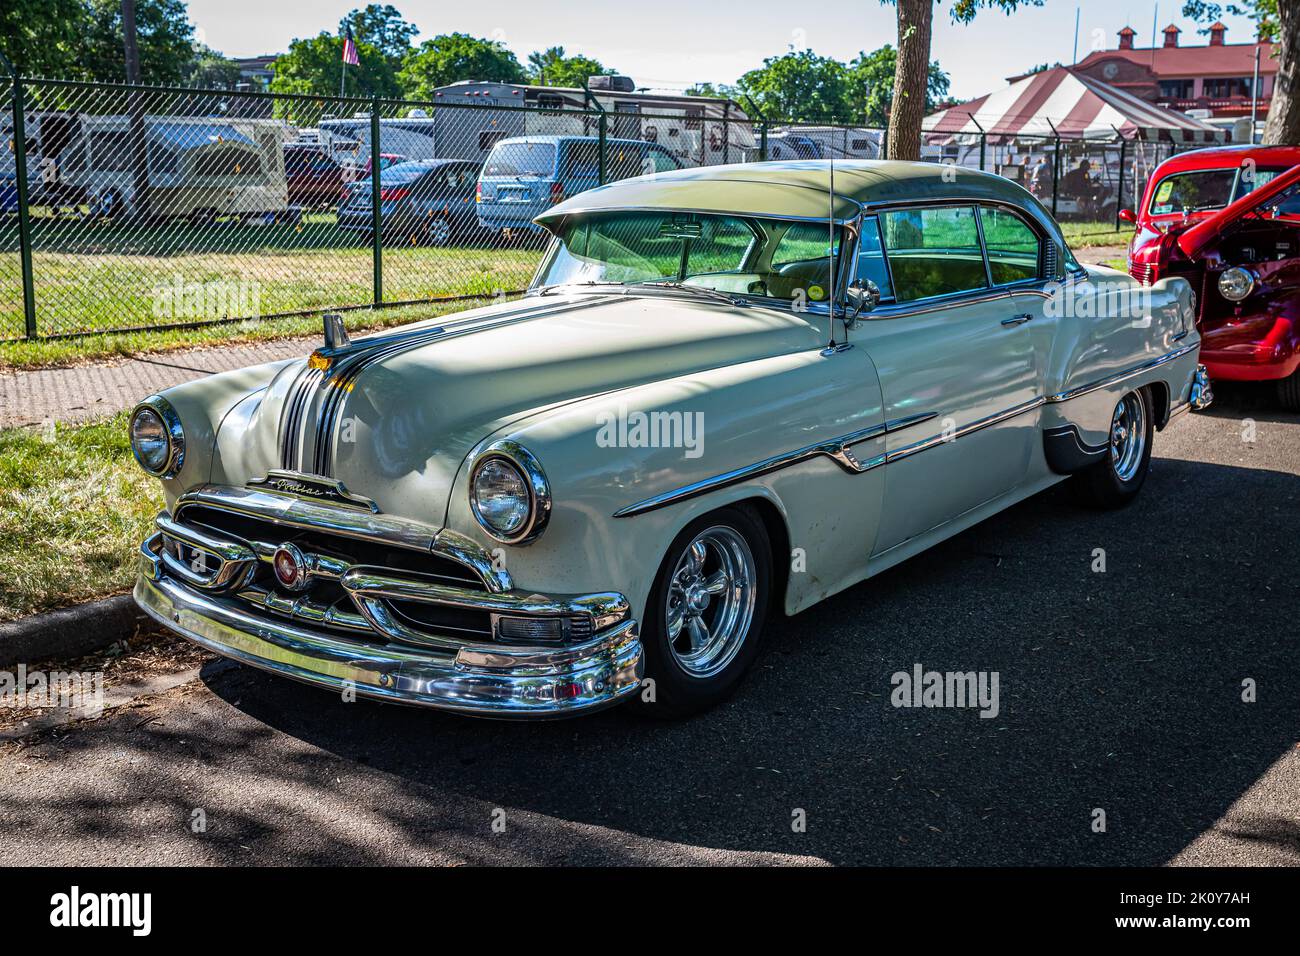 Falcon Heights, MN - June 18, 2022: High perspective front corner view of a 1953 Pontiac Chieftain 2 Door Sedan at a local car show. Stock Photo